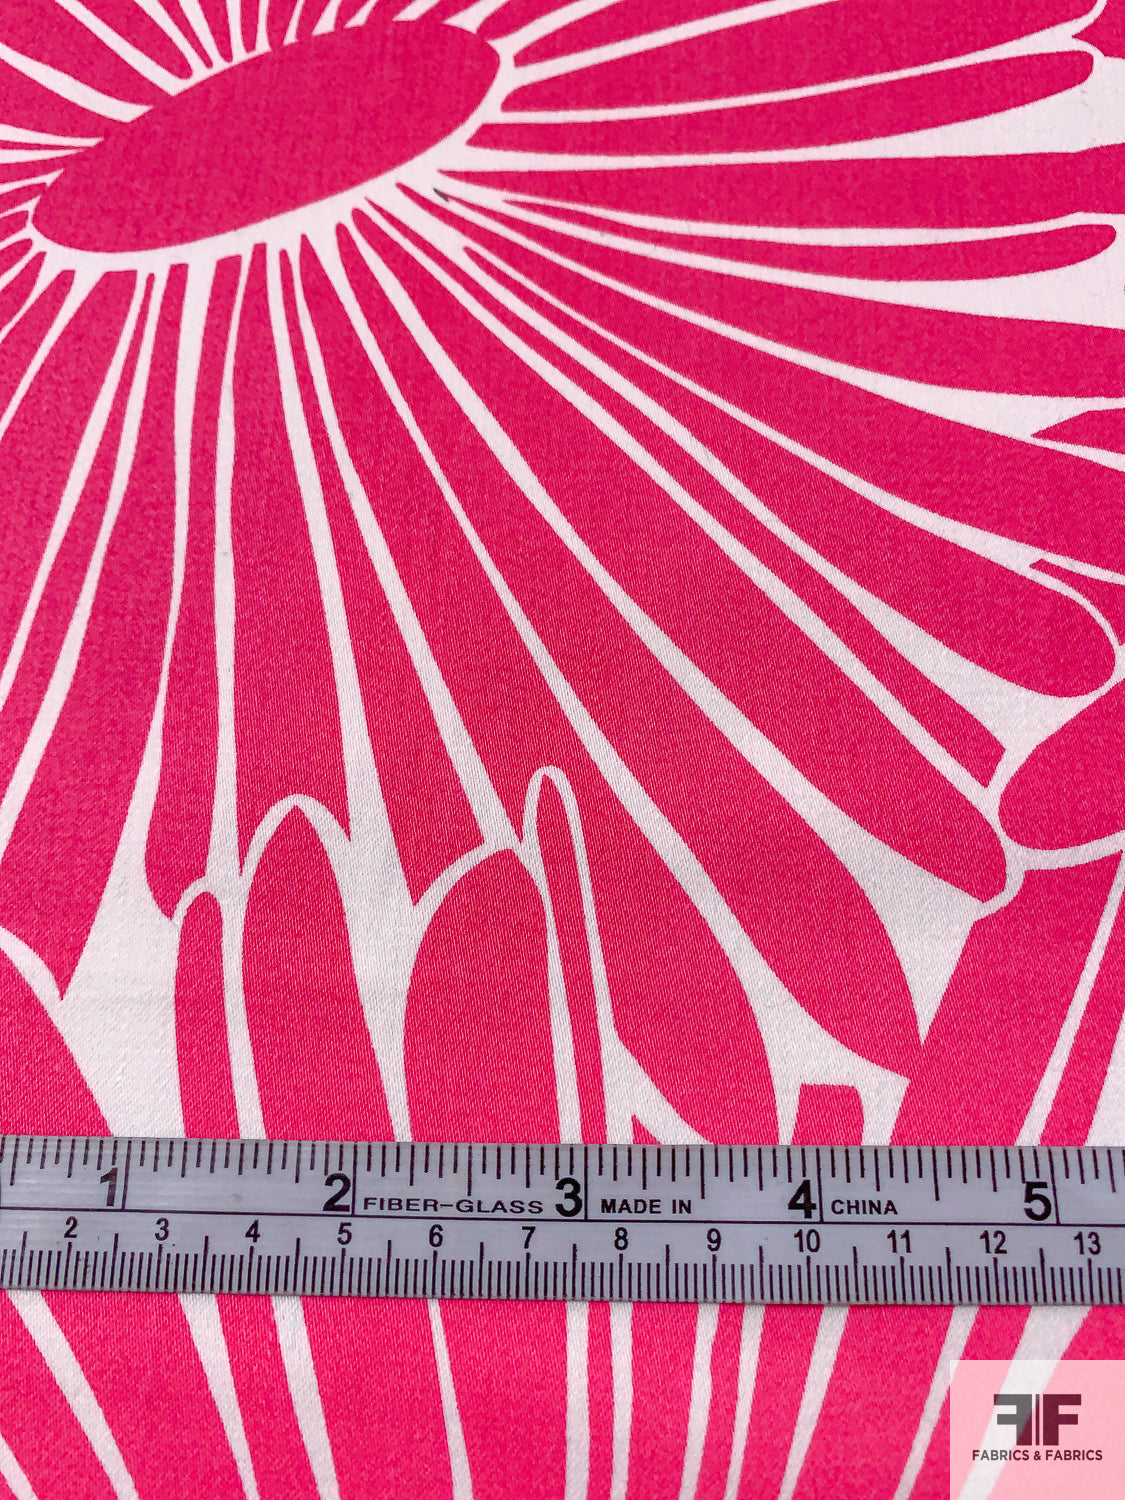 Large-Scale Floral Graphic Printed Stretch Fine Cotton Twill - Bright Pink / Off-White